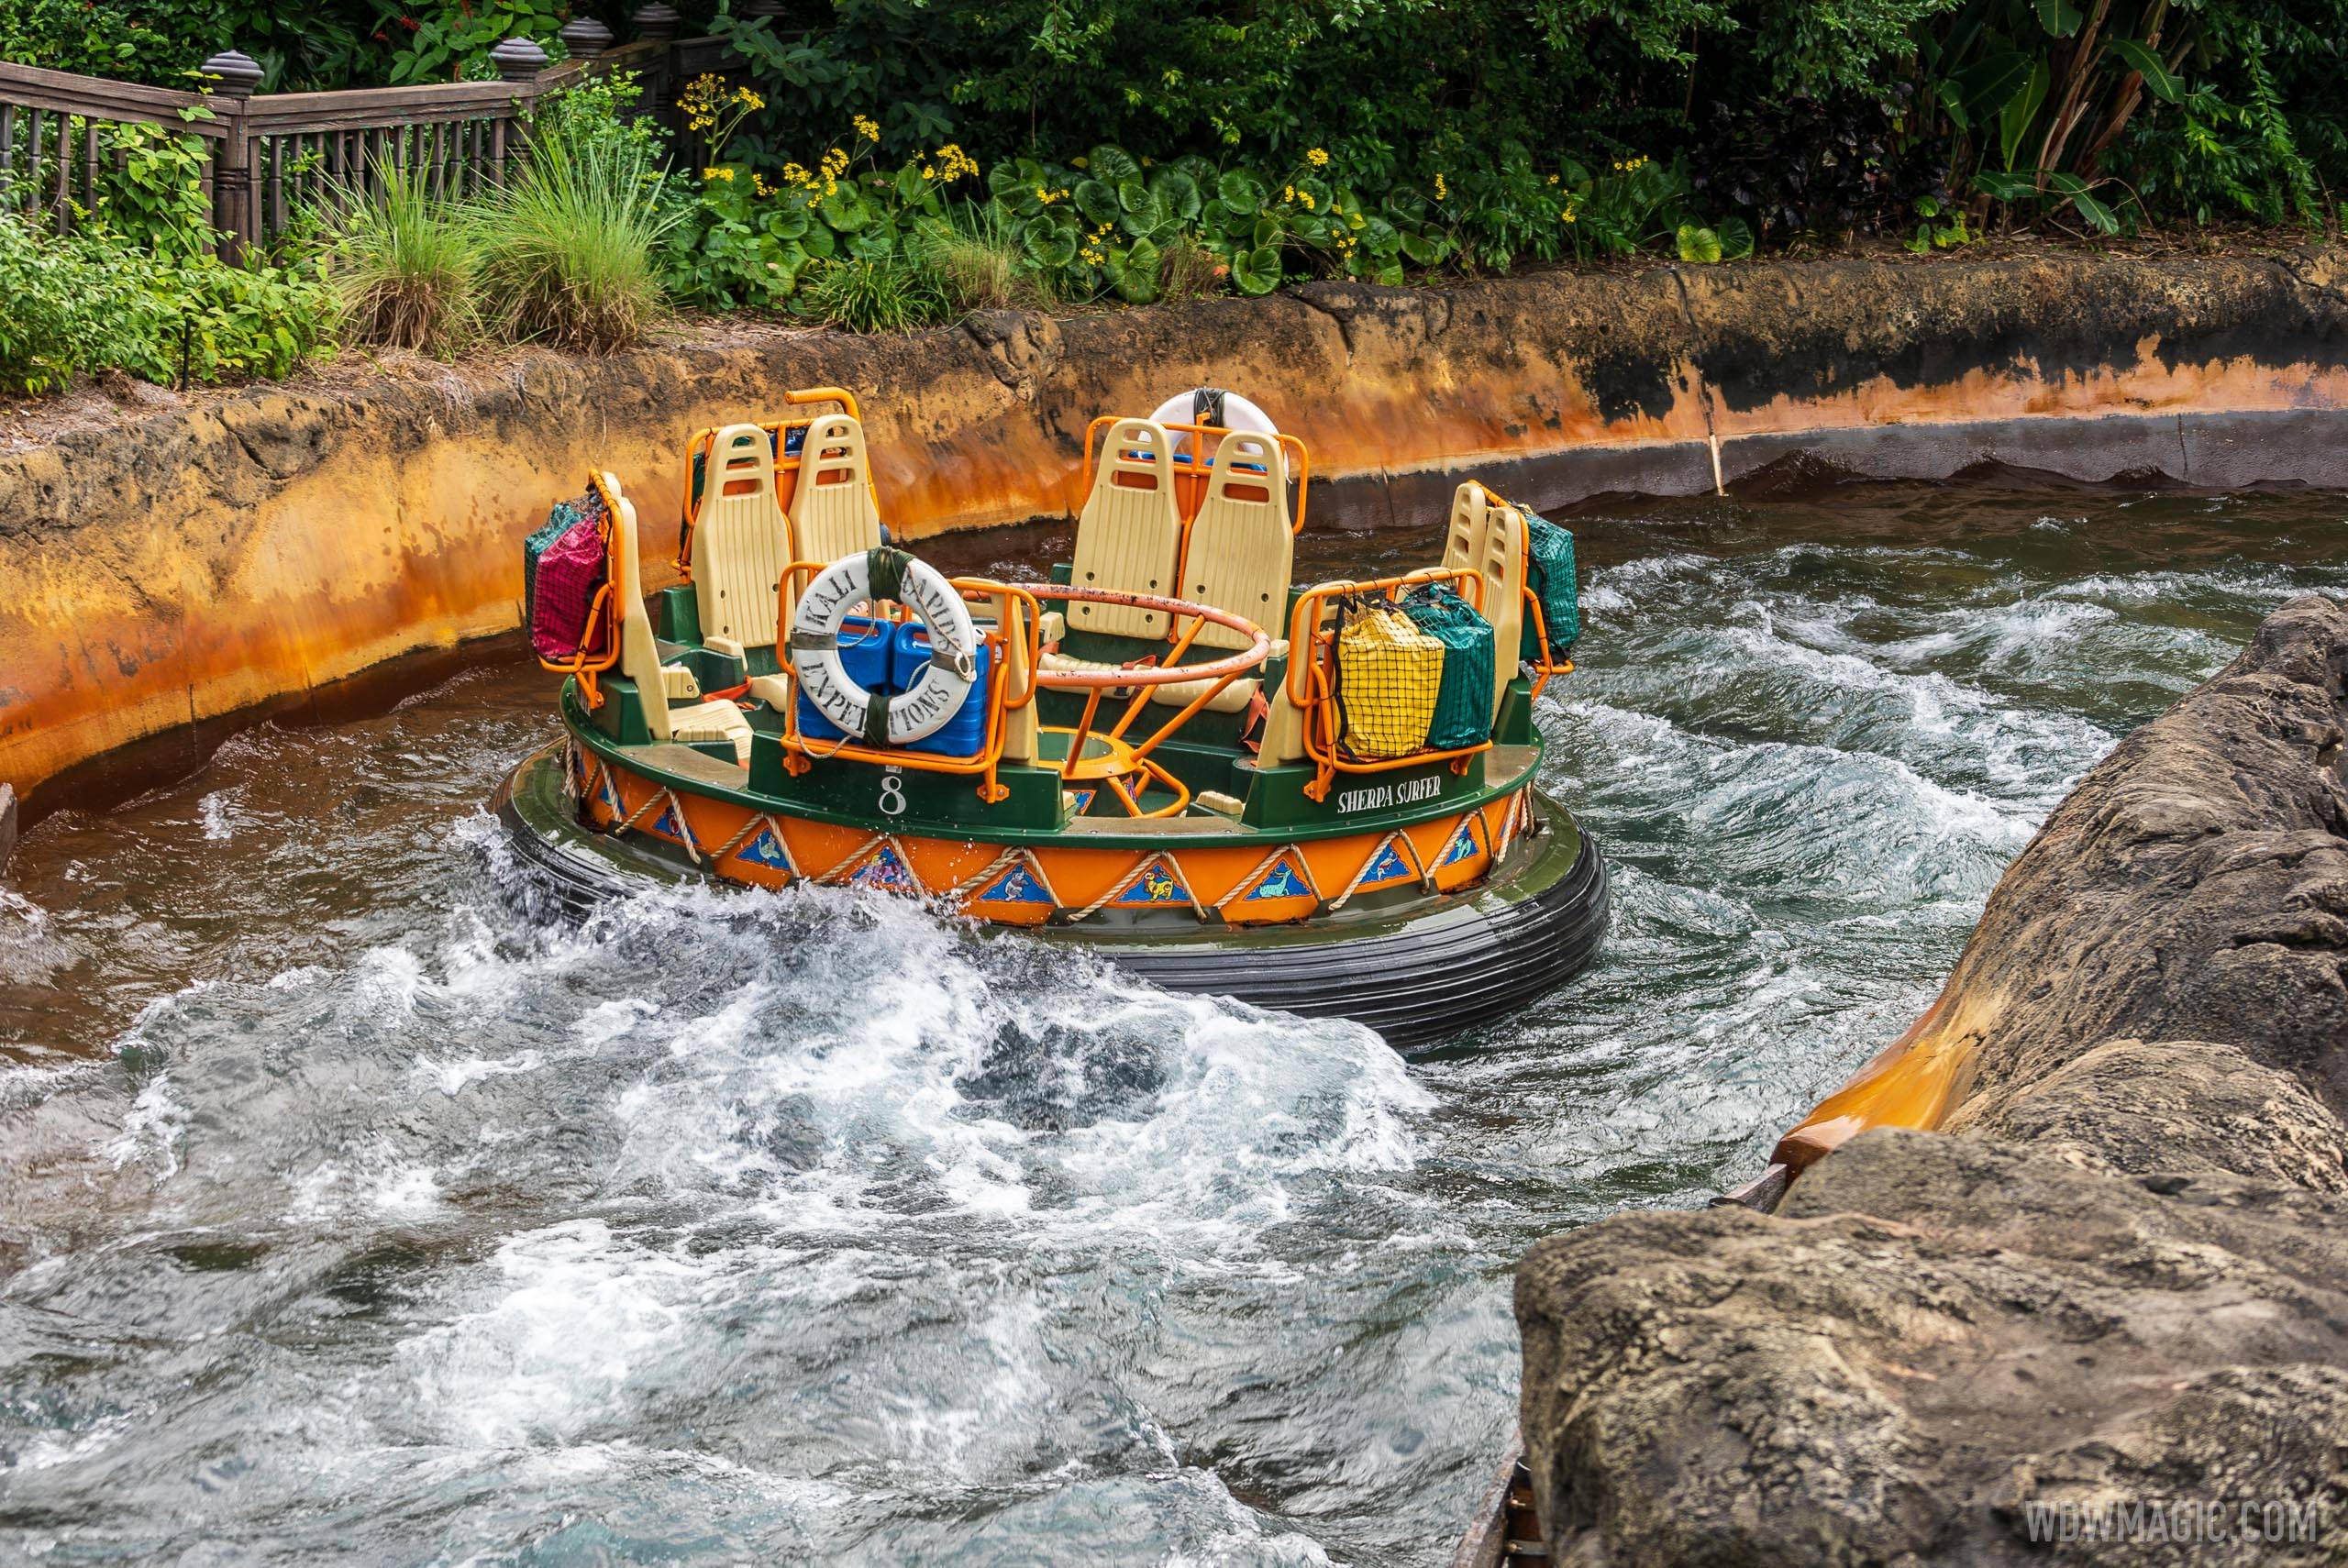 Kali River Rapids scheduled for 5 week refurbishment in the new year